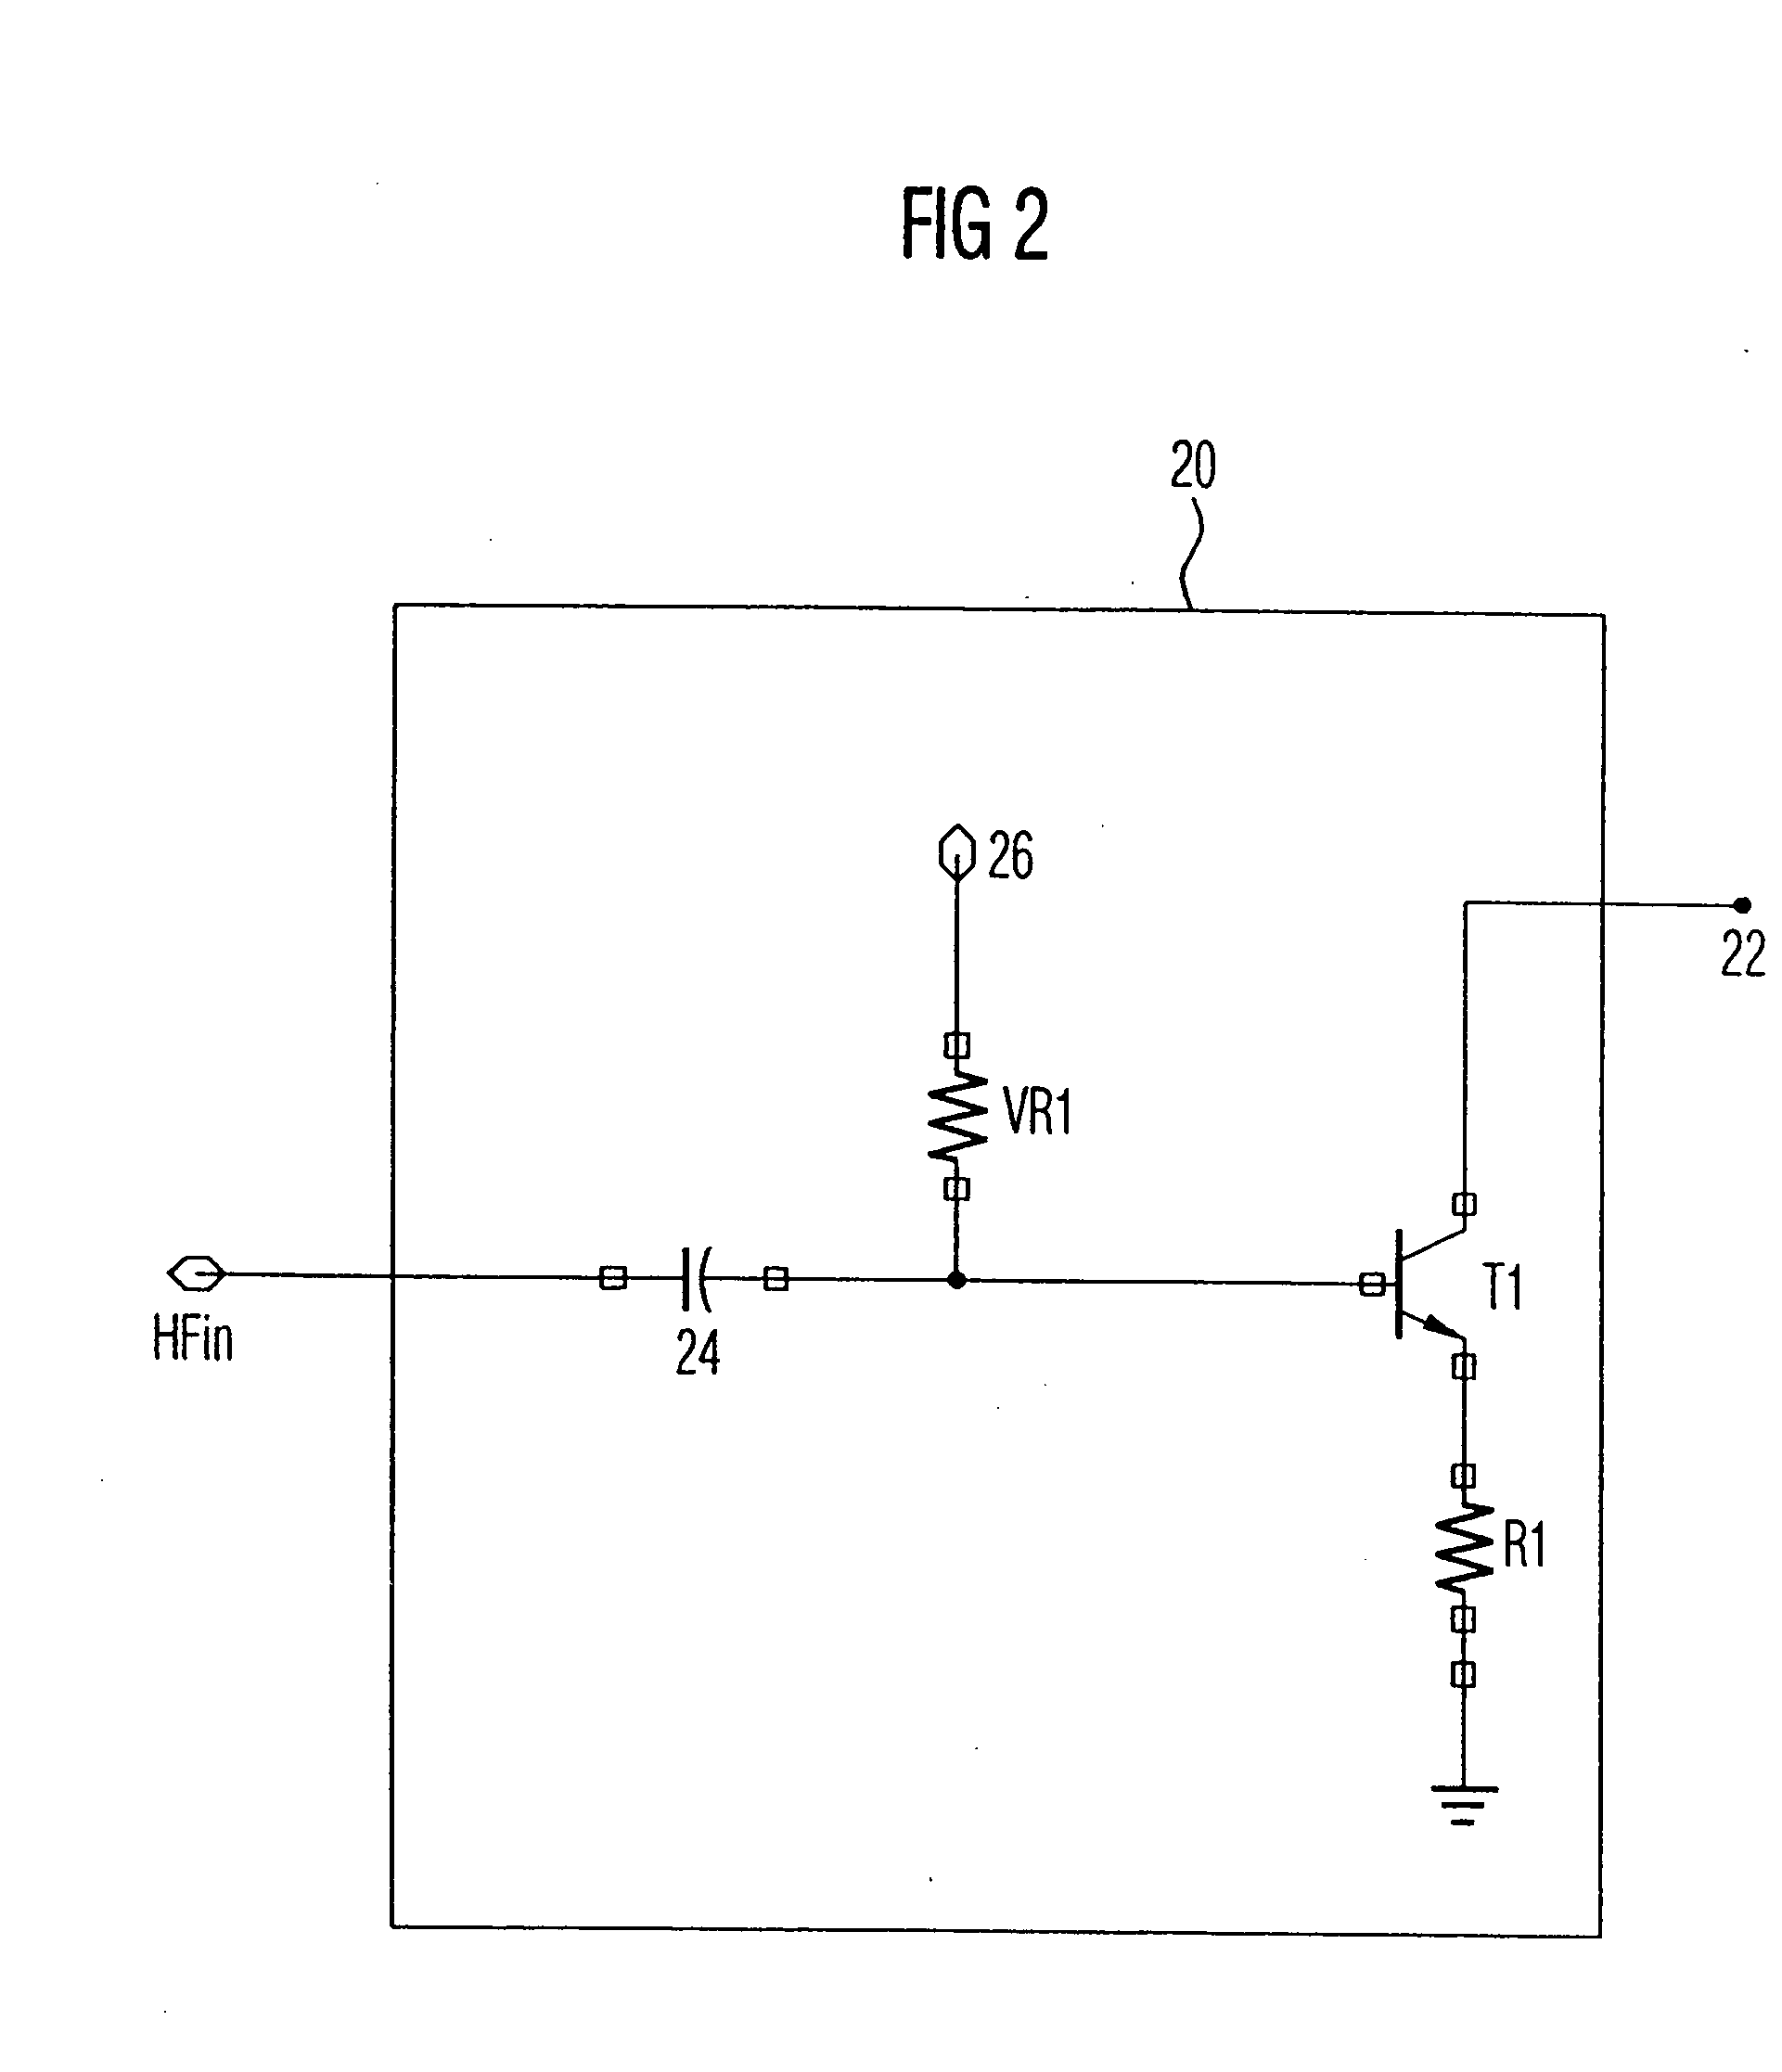 Amplifier circuit with active gain step circuit